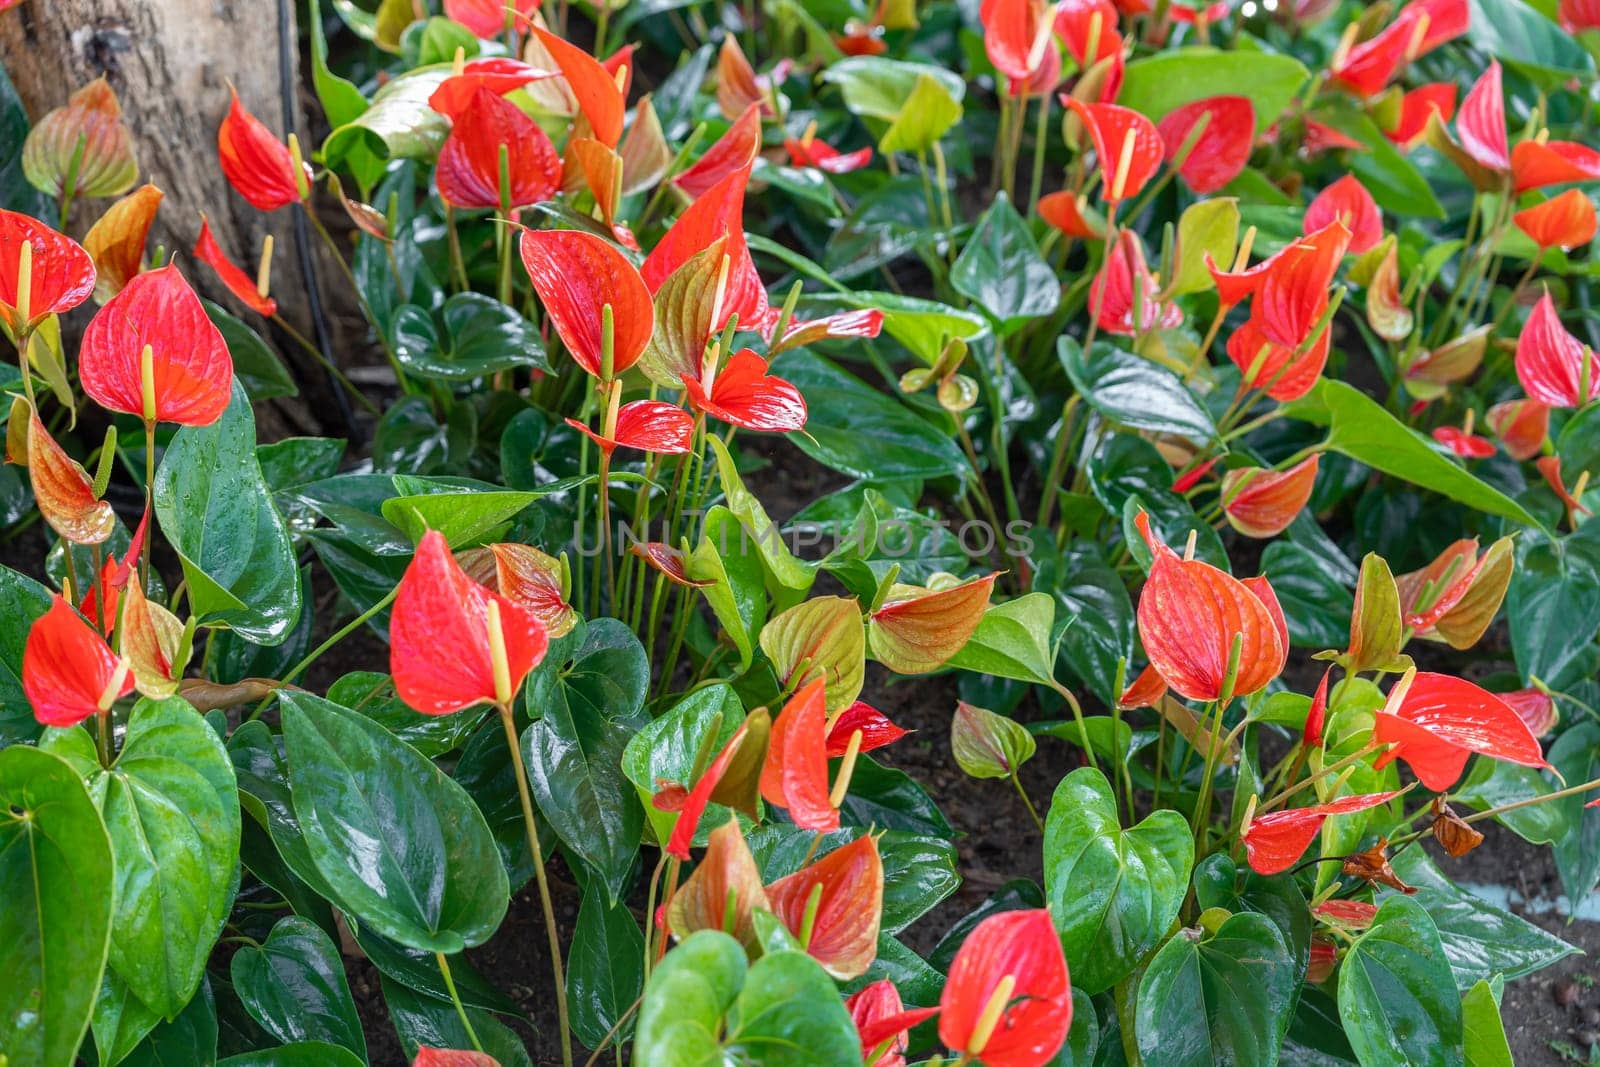 Many red anthuriums with green leaves